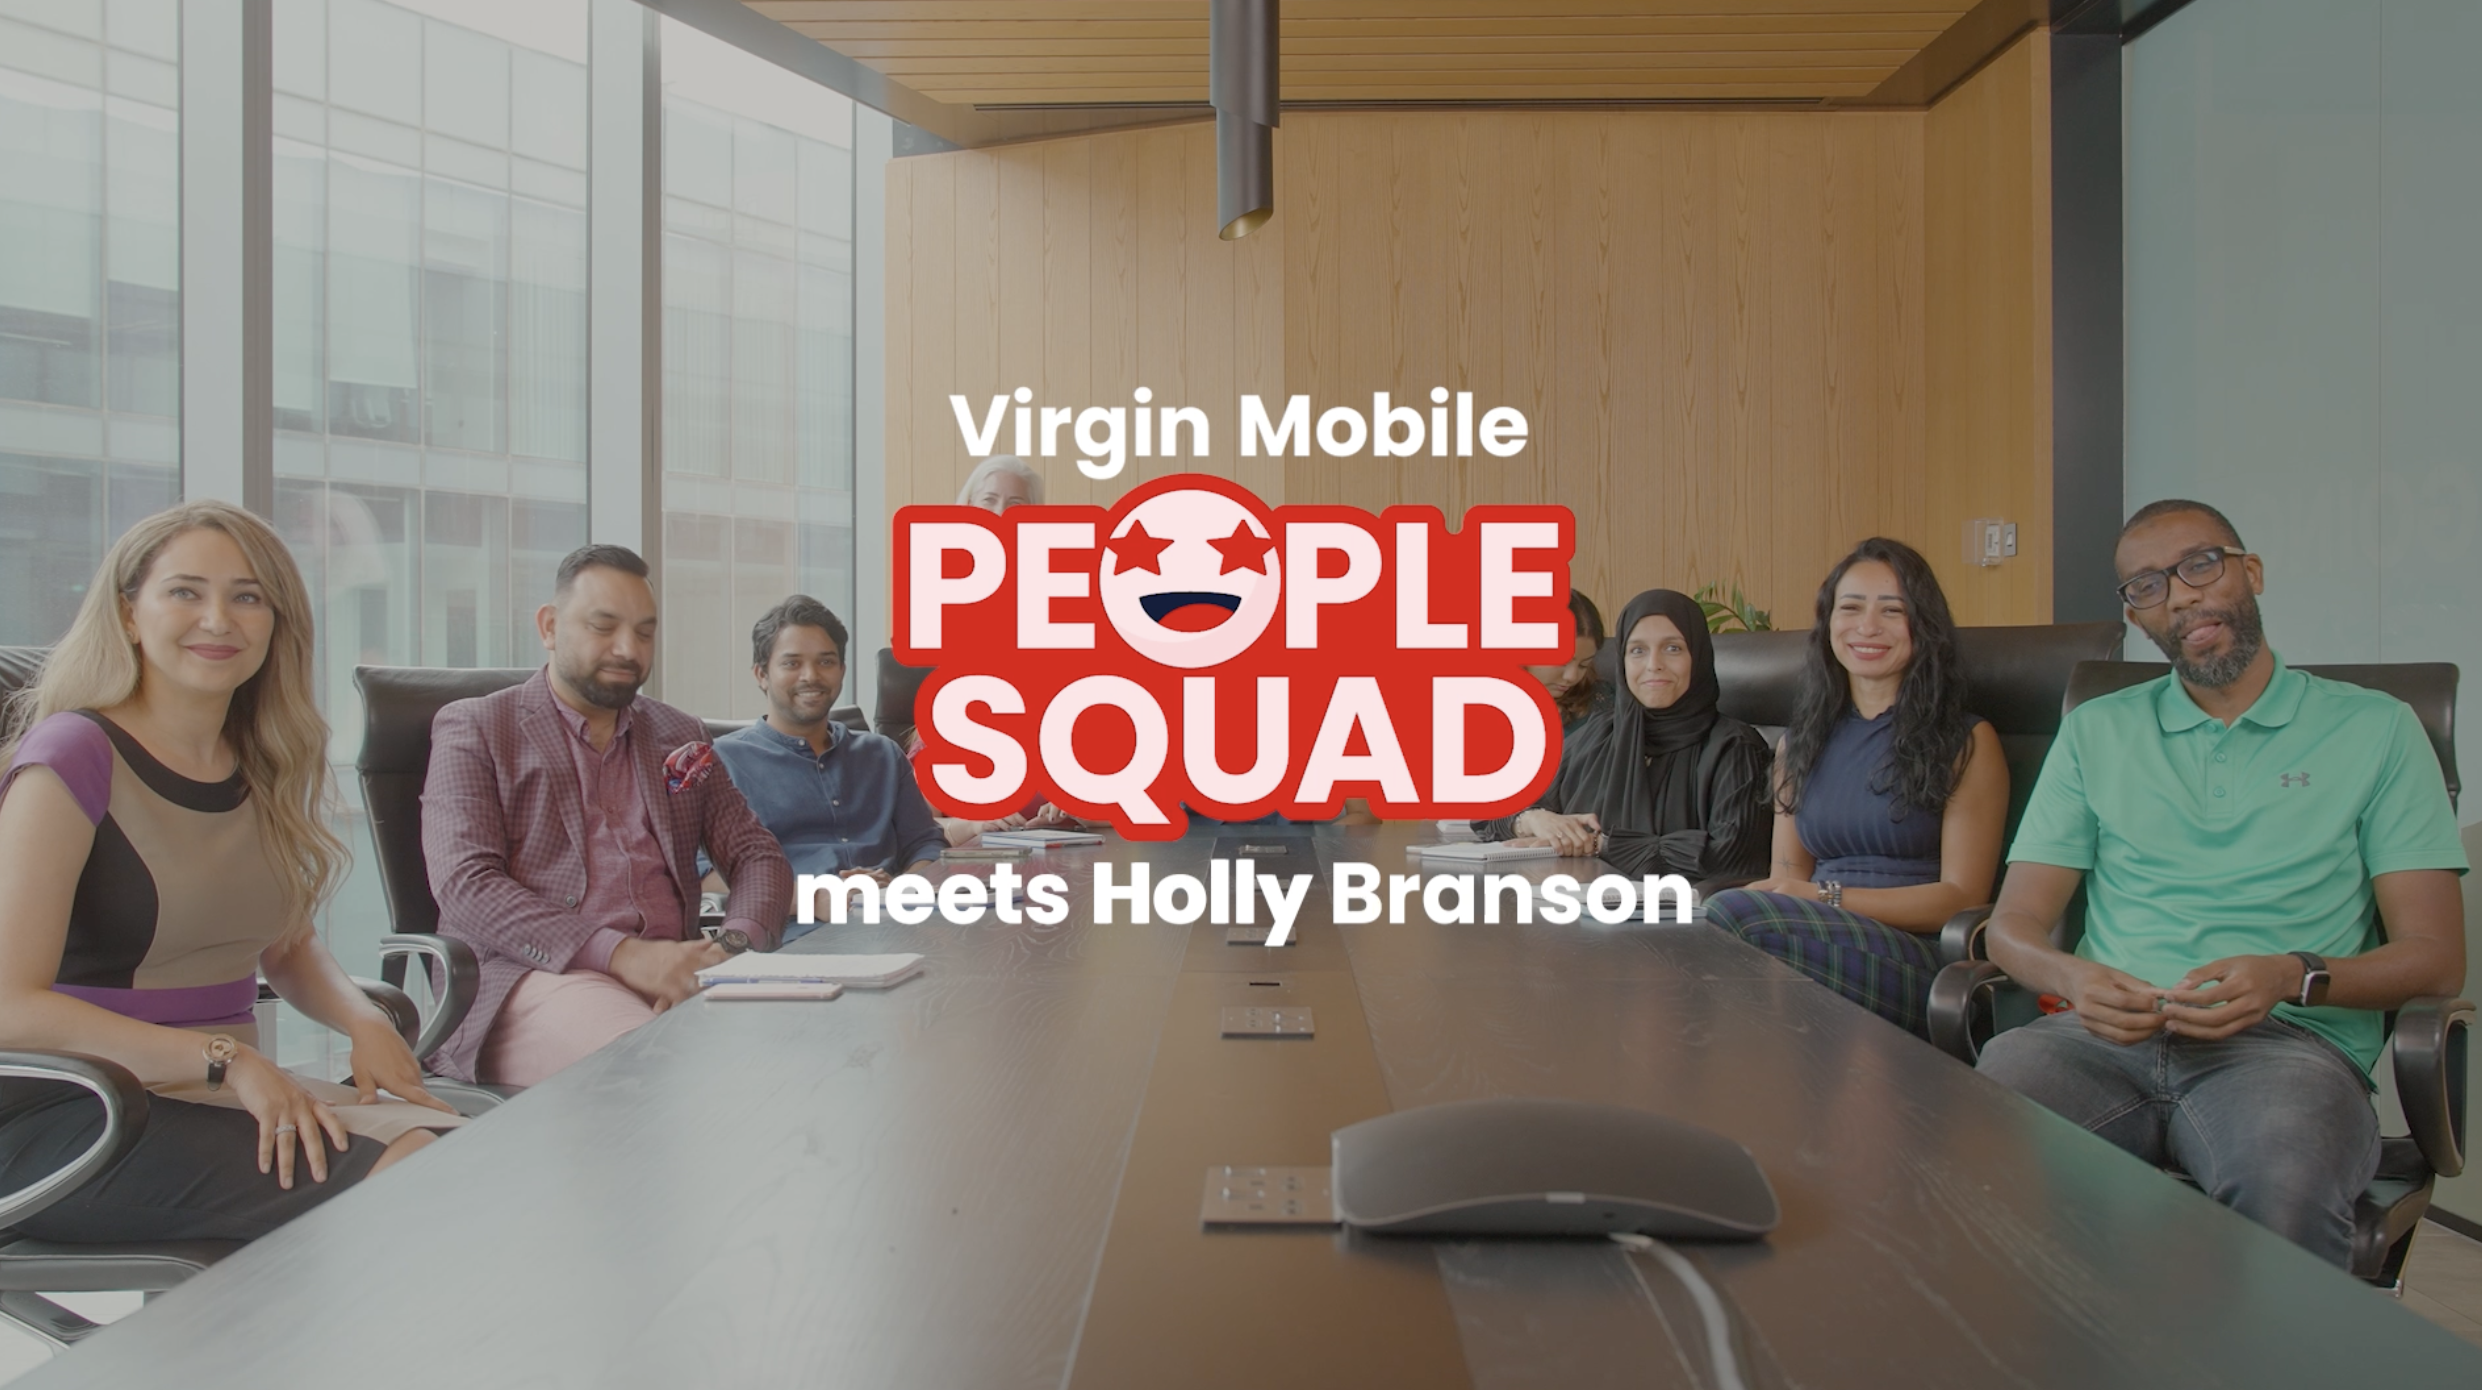 Holly Branson in a Q&A with Virgin Mobile UAE's People Squad